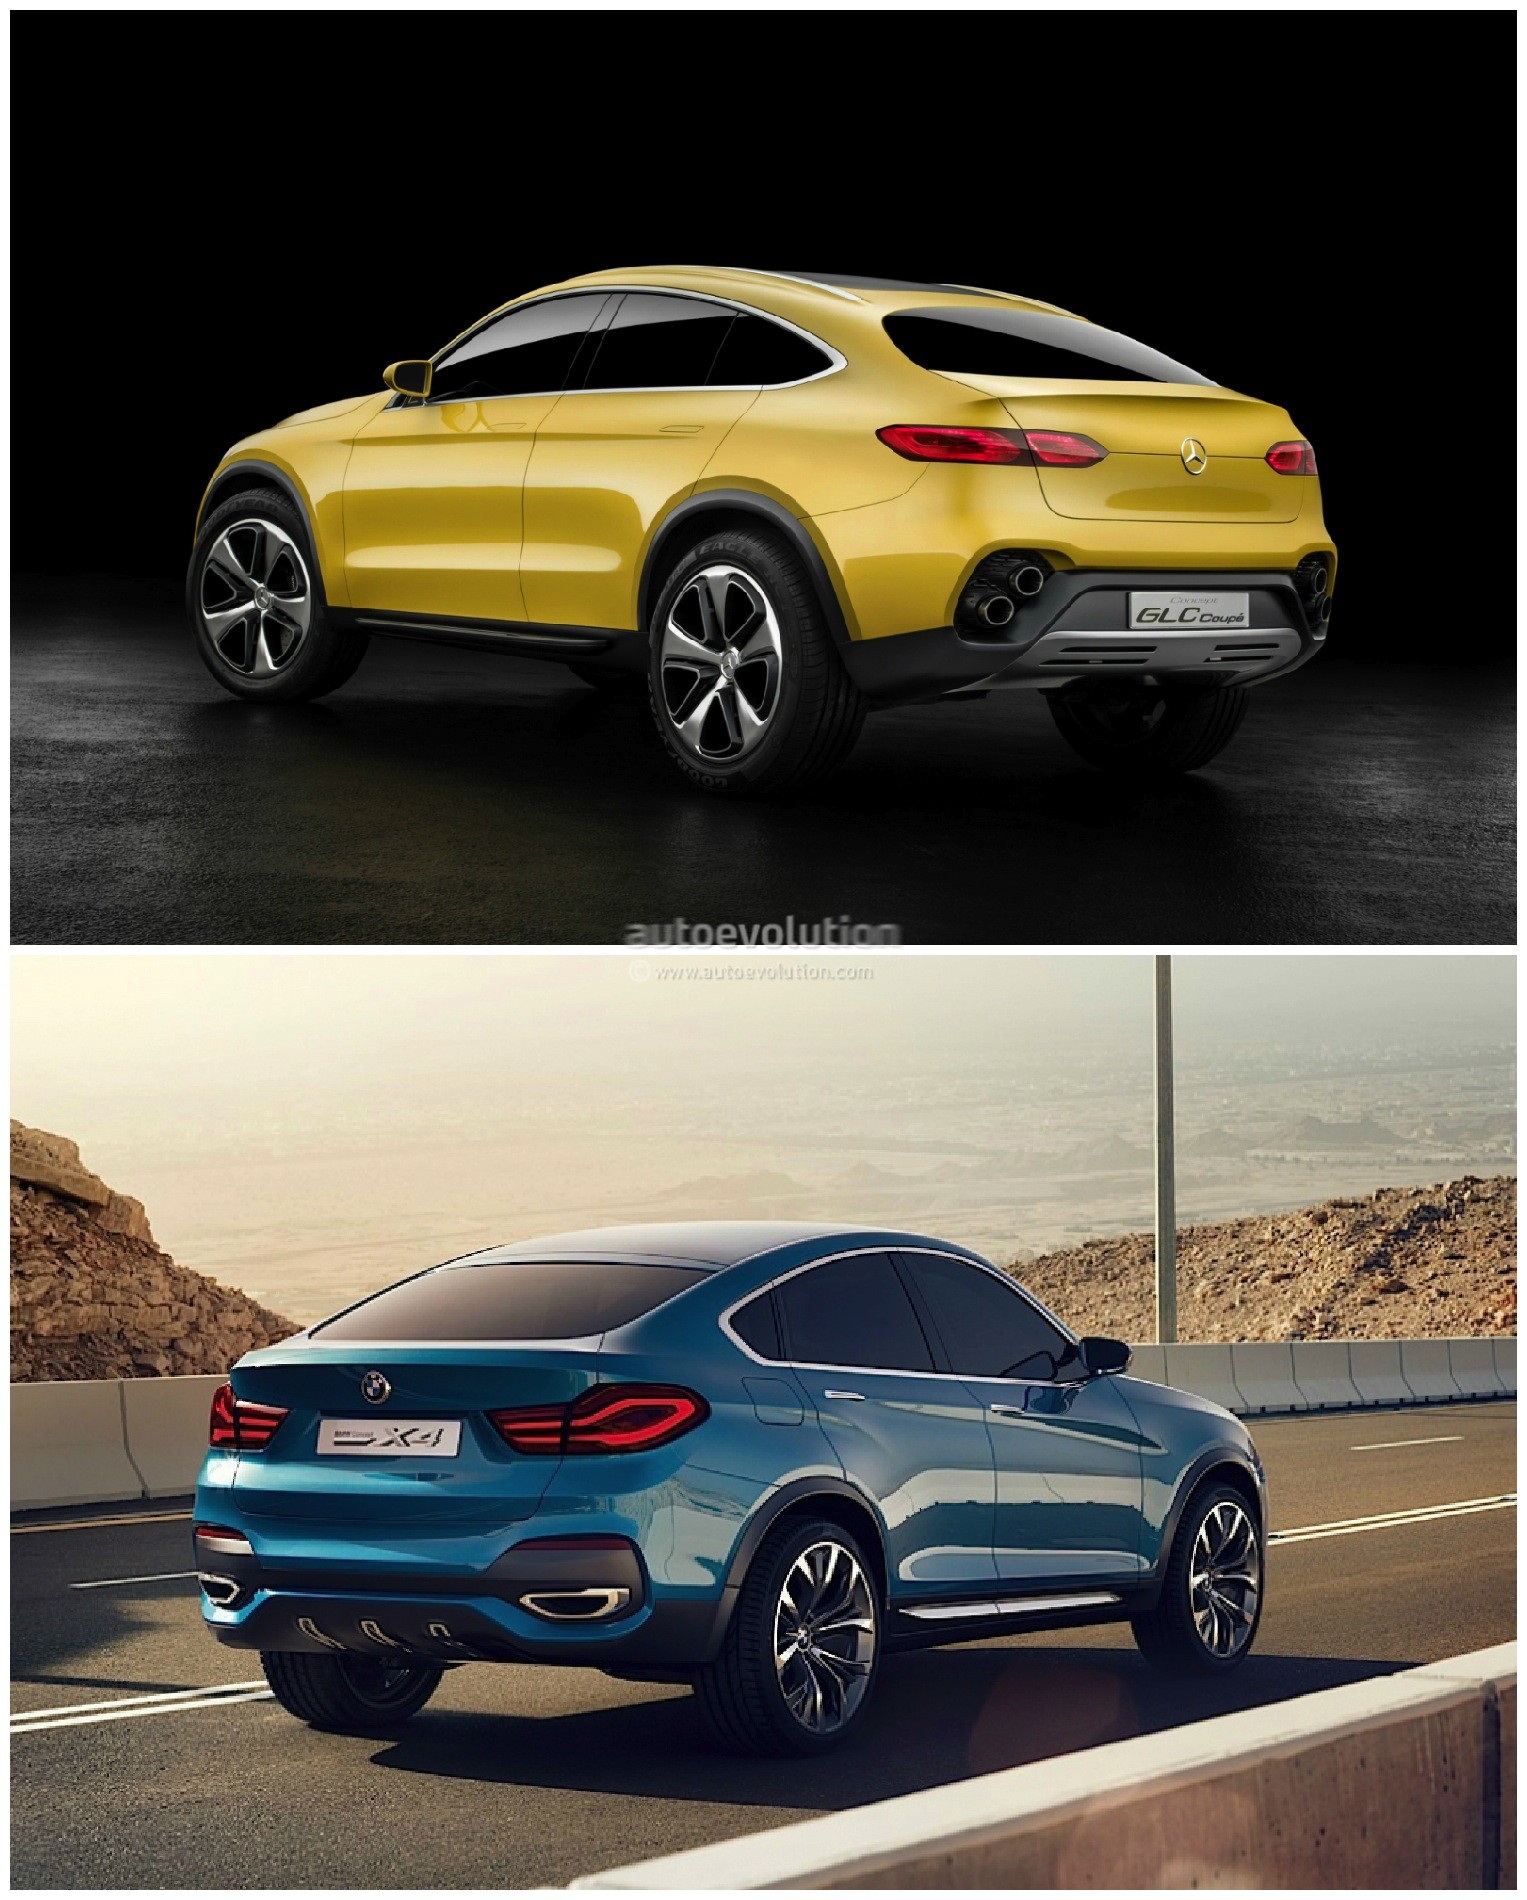 Mercedes Glc Coupe Vs Bmw X4 The Sports Activity Coupe